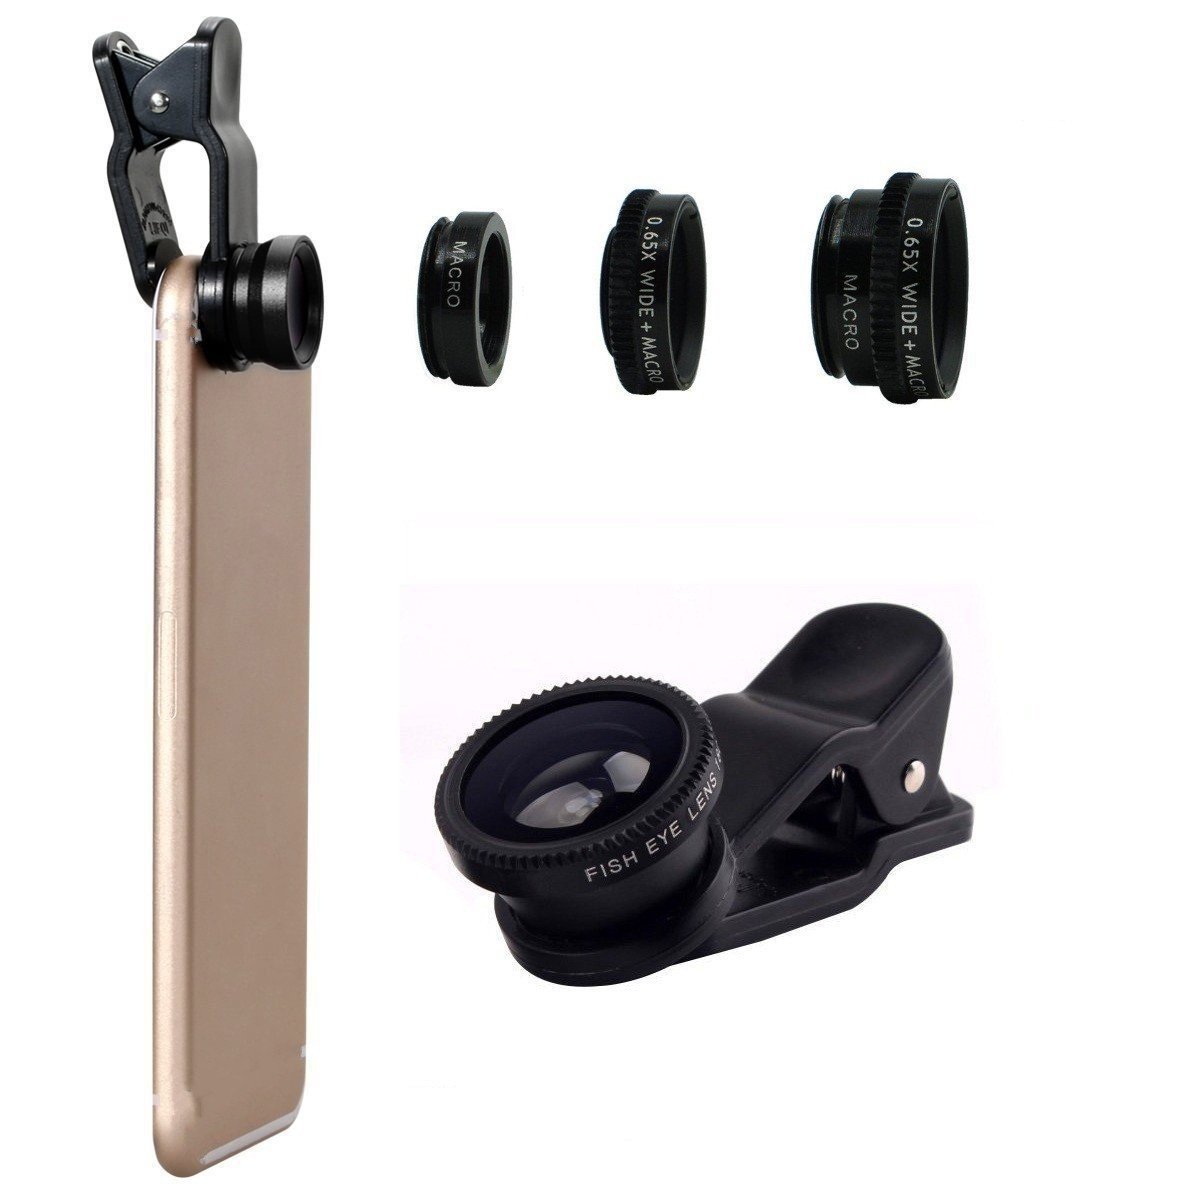 Clip on iPhone Lens Set, $7